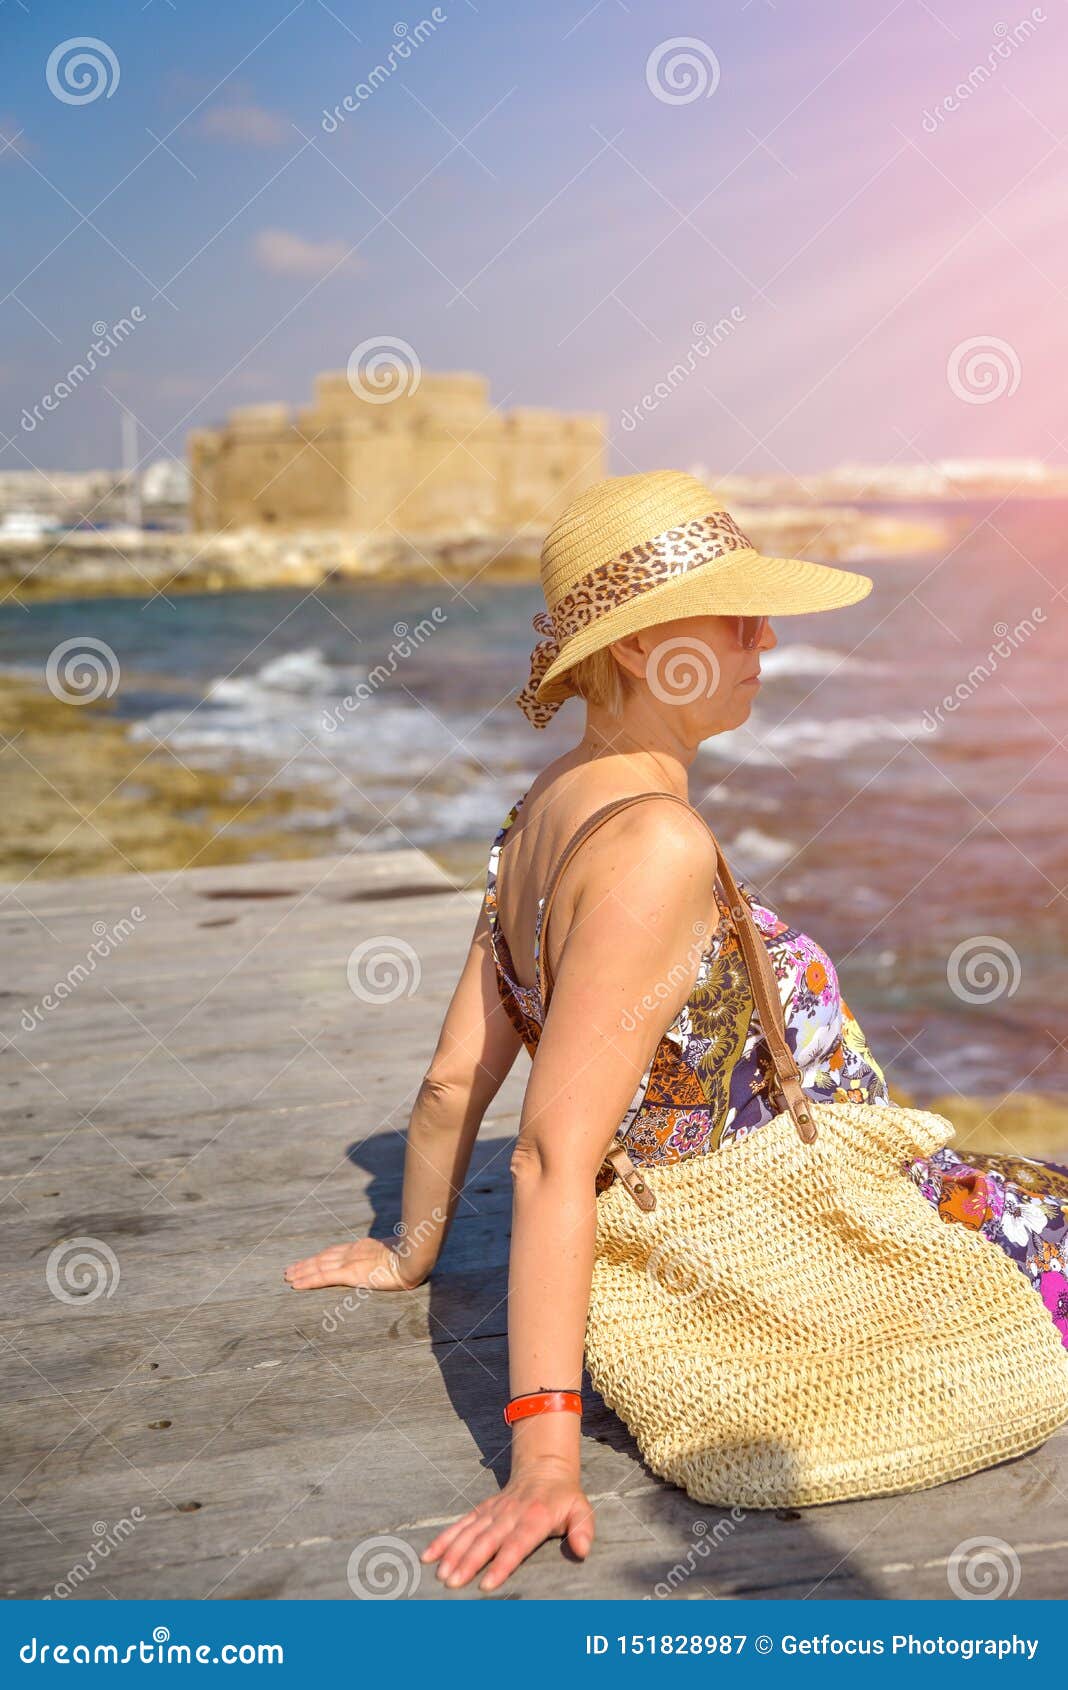 Attractive Woman Sitting On Pier Stock Image Image Of Peaceful Summer 151828987